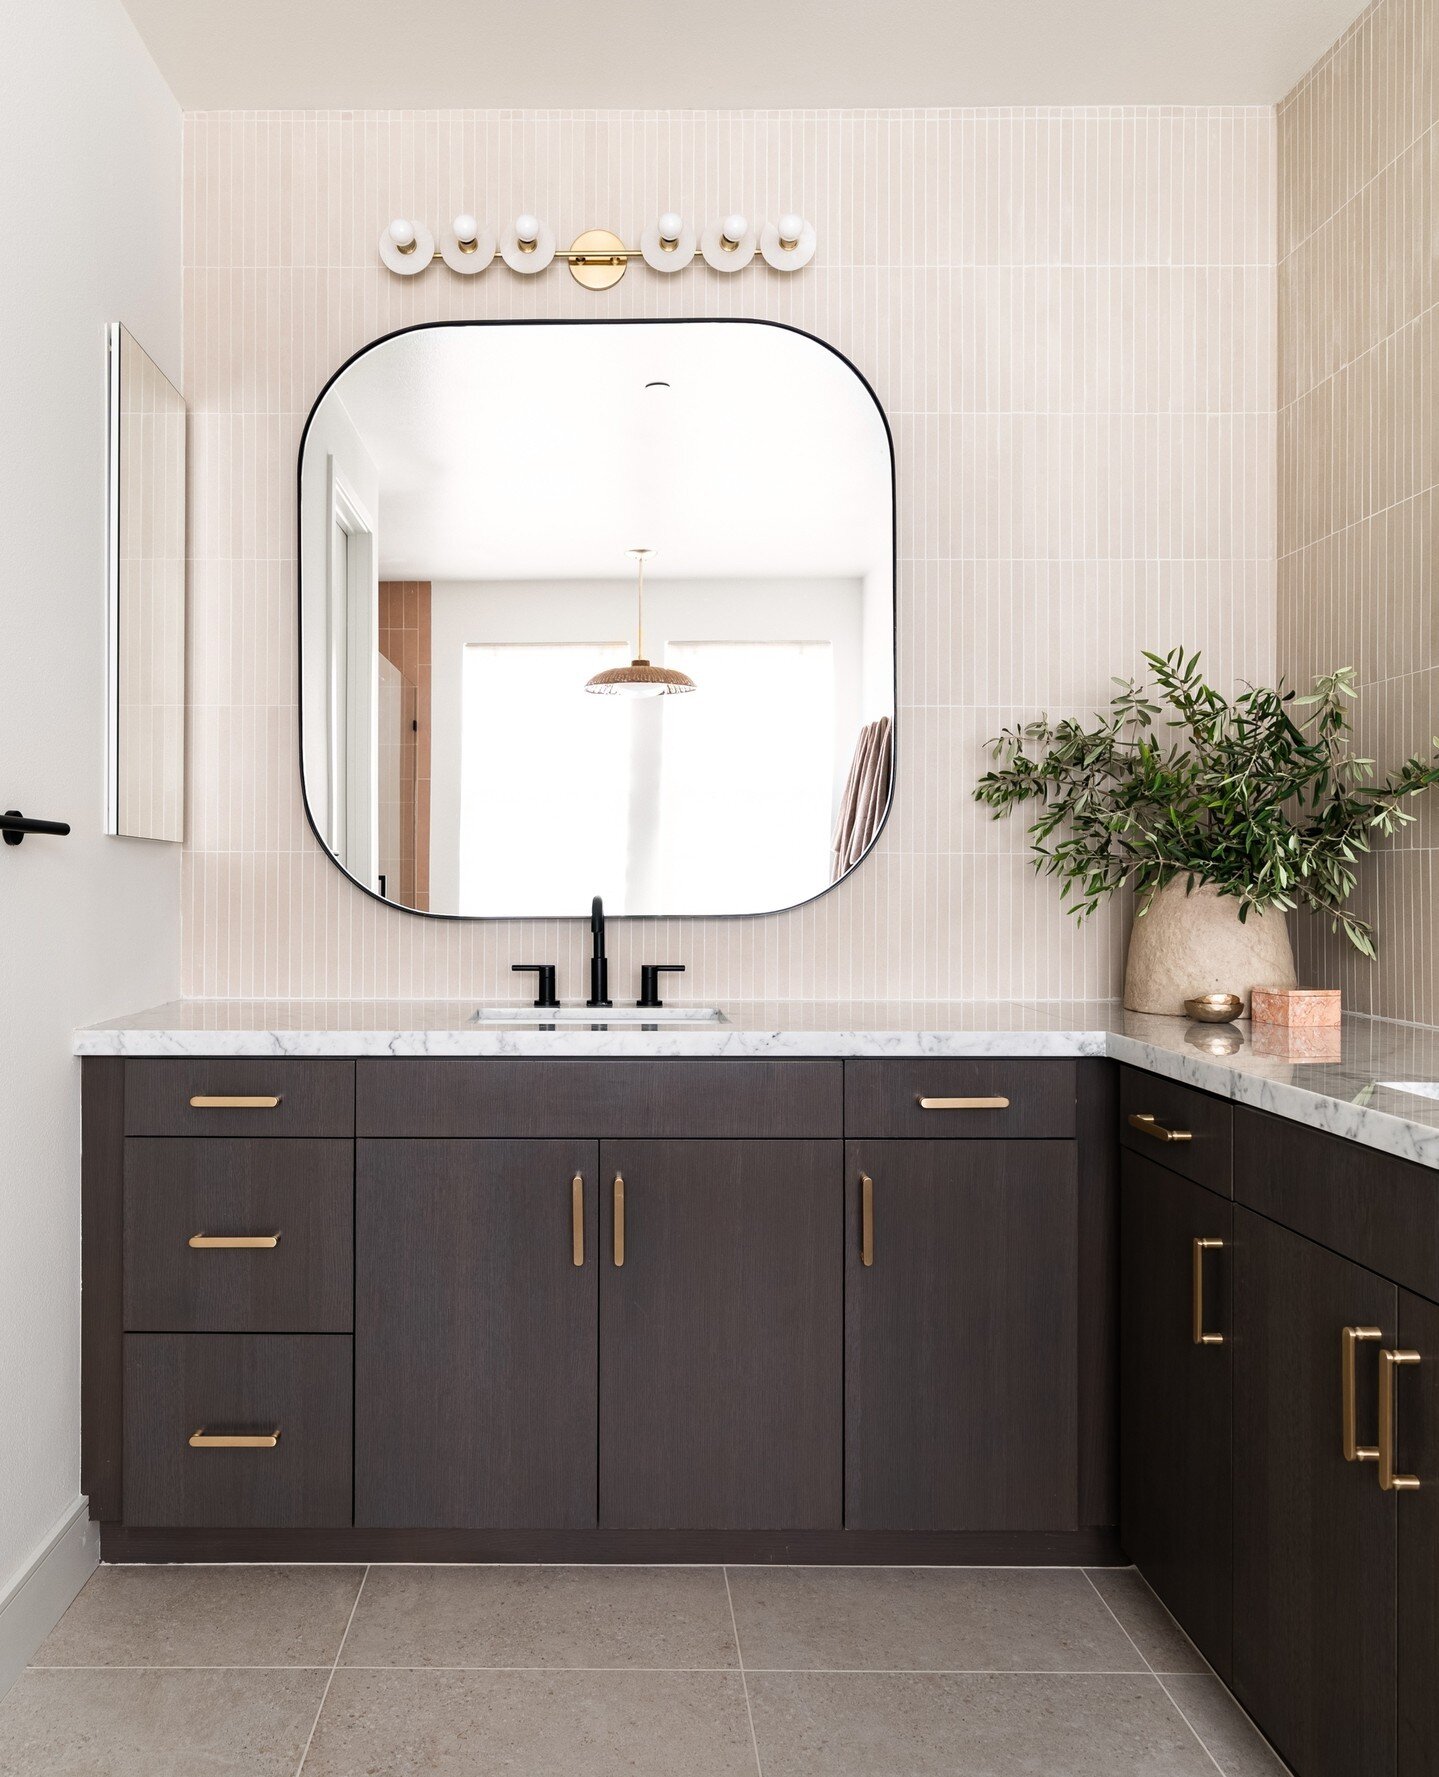 Finished products like these make all the hard work worth it ✨ Contact us today to kickstart that bathroom renovation you've been dreaming about 💭⁠
⁠
⁠
⁠
⁠
📸: @sandiegointeriorphotography⁠
⁠
⁠
⁠
⁠
#kenmarwayproject #sandiego #interiorinspo #myseaso